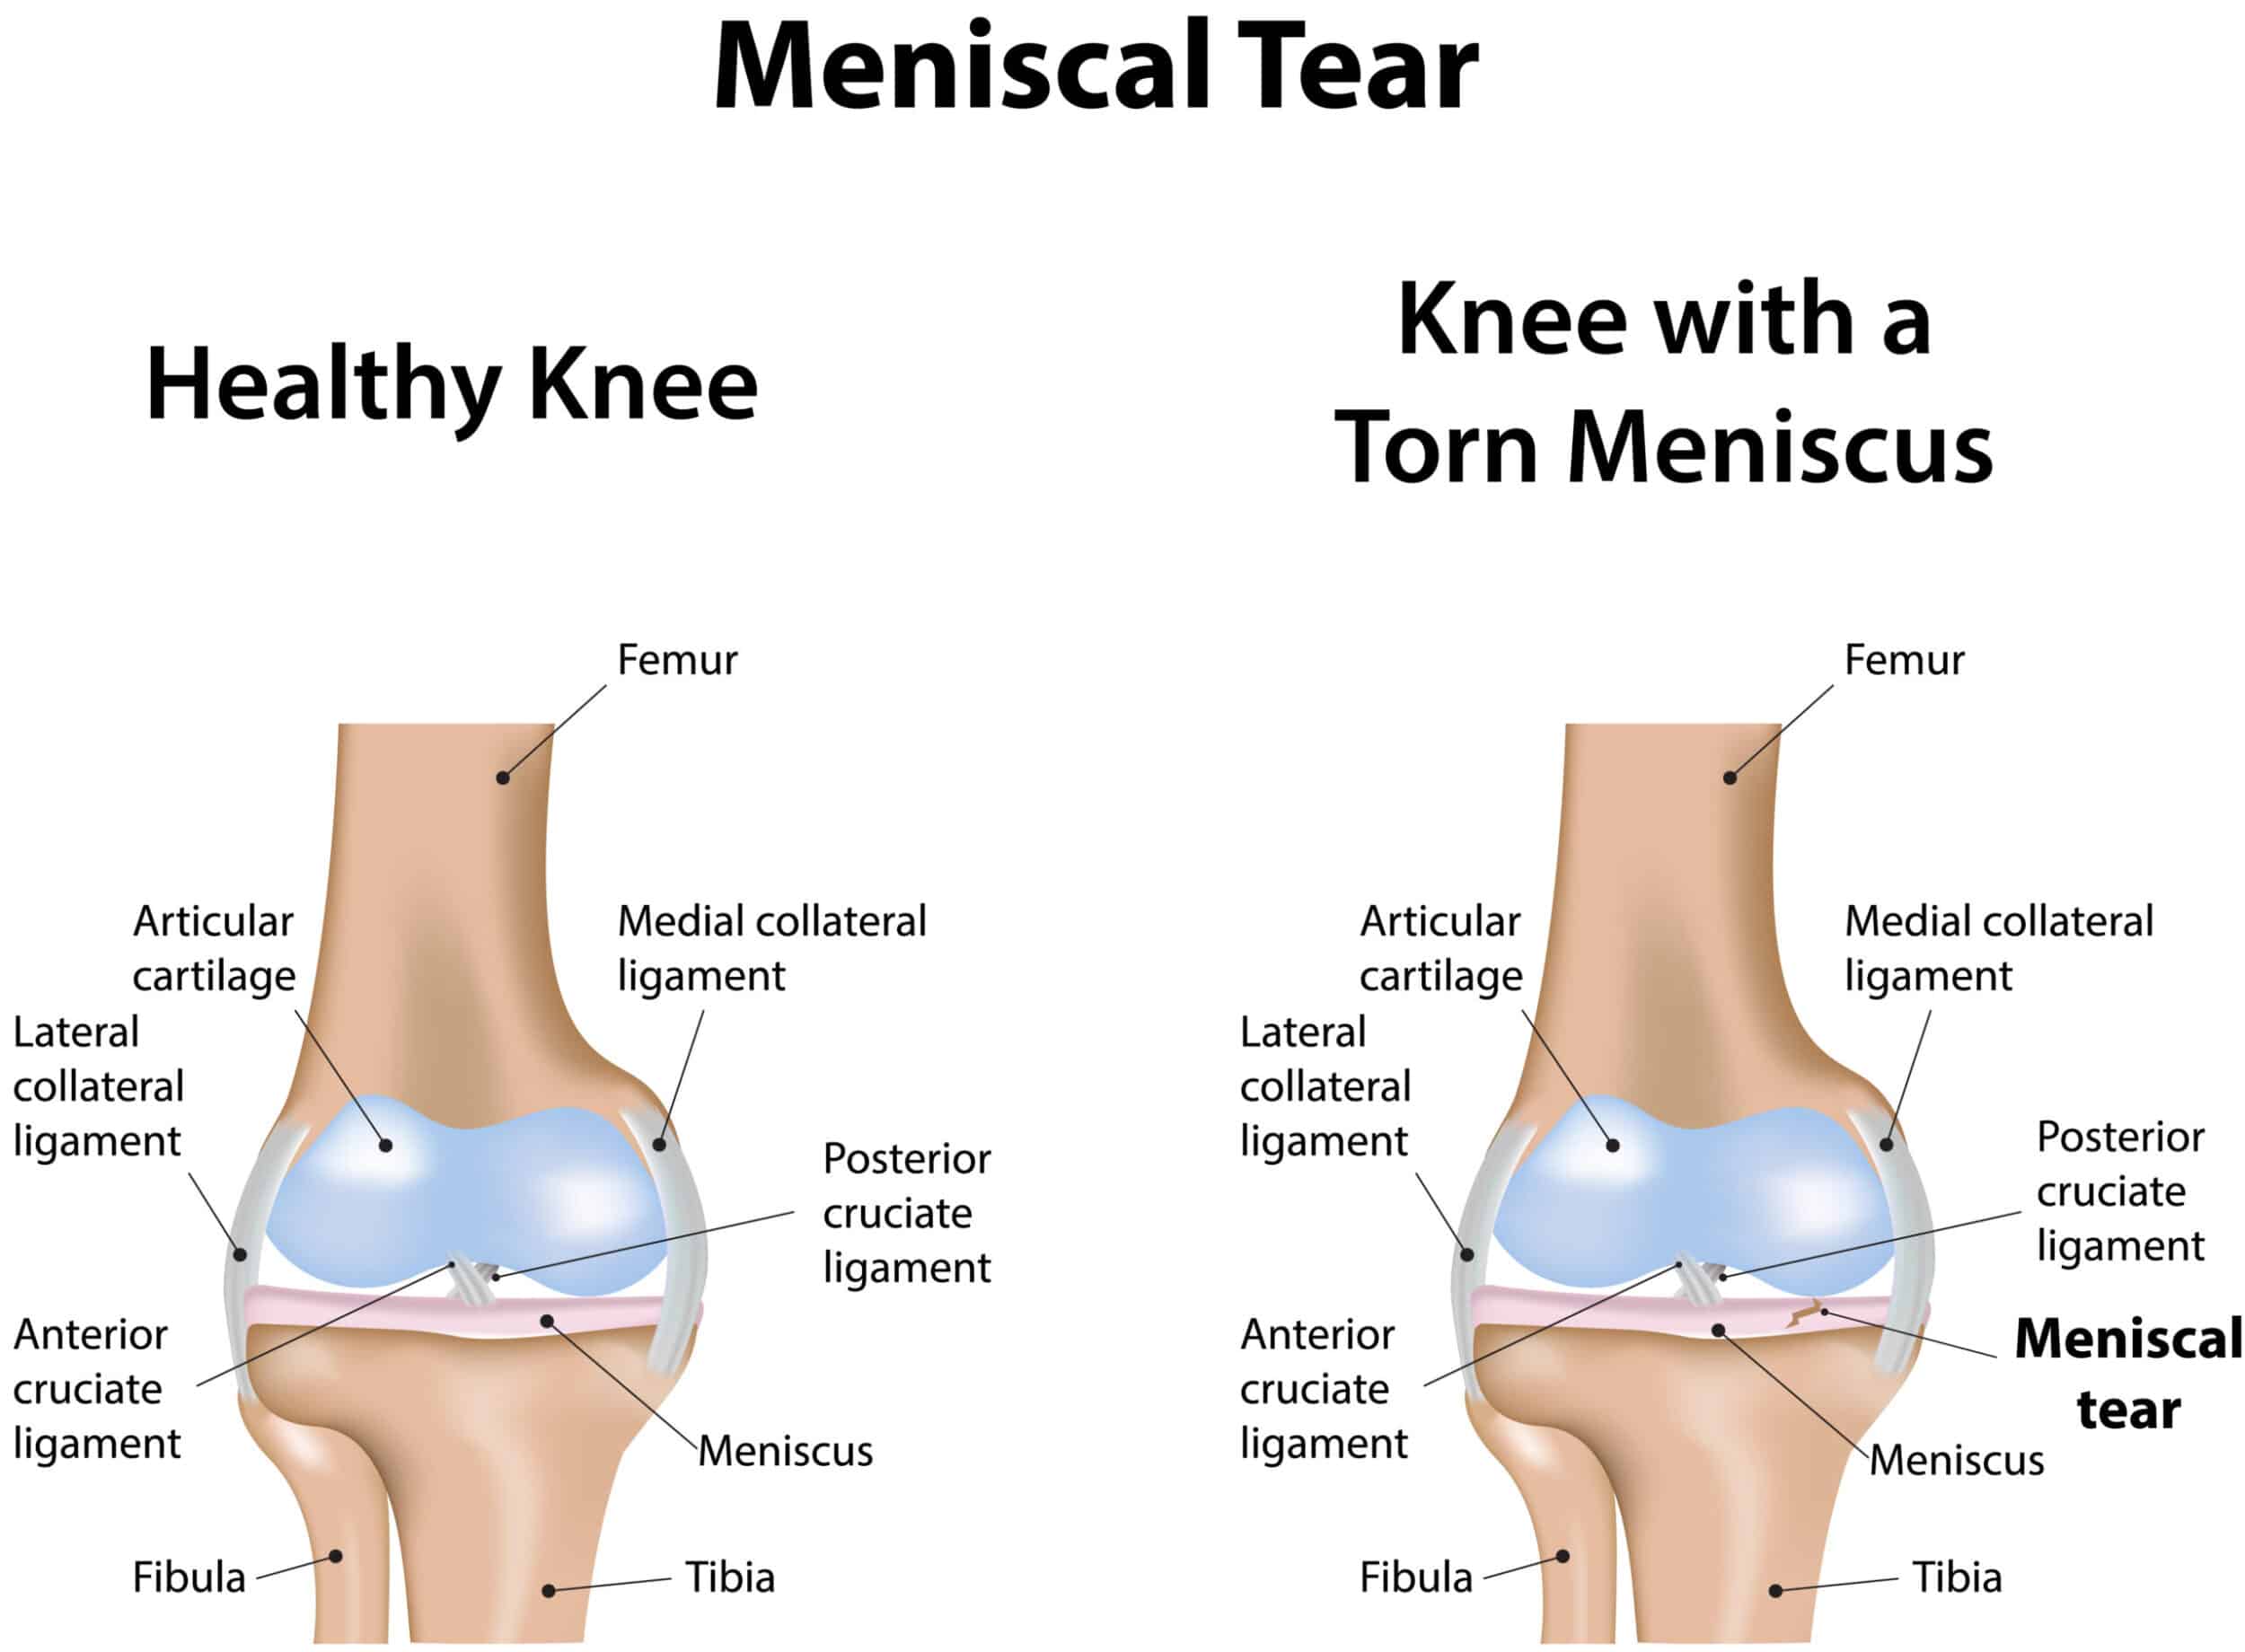 two illustrations of kneecaps side by side, on with meniscal tear